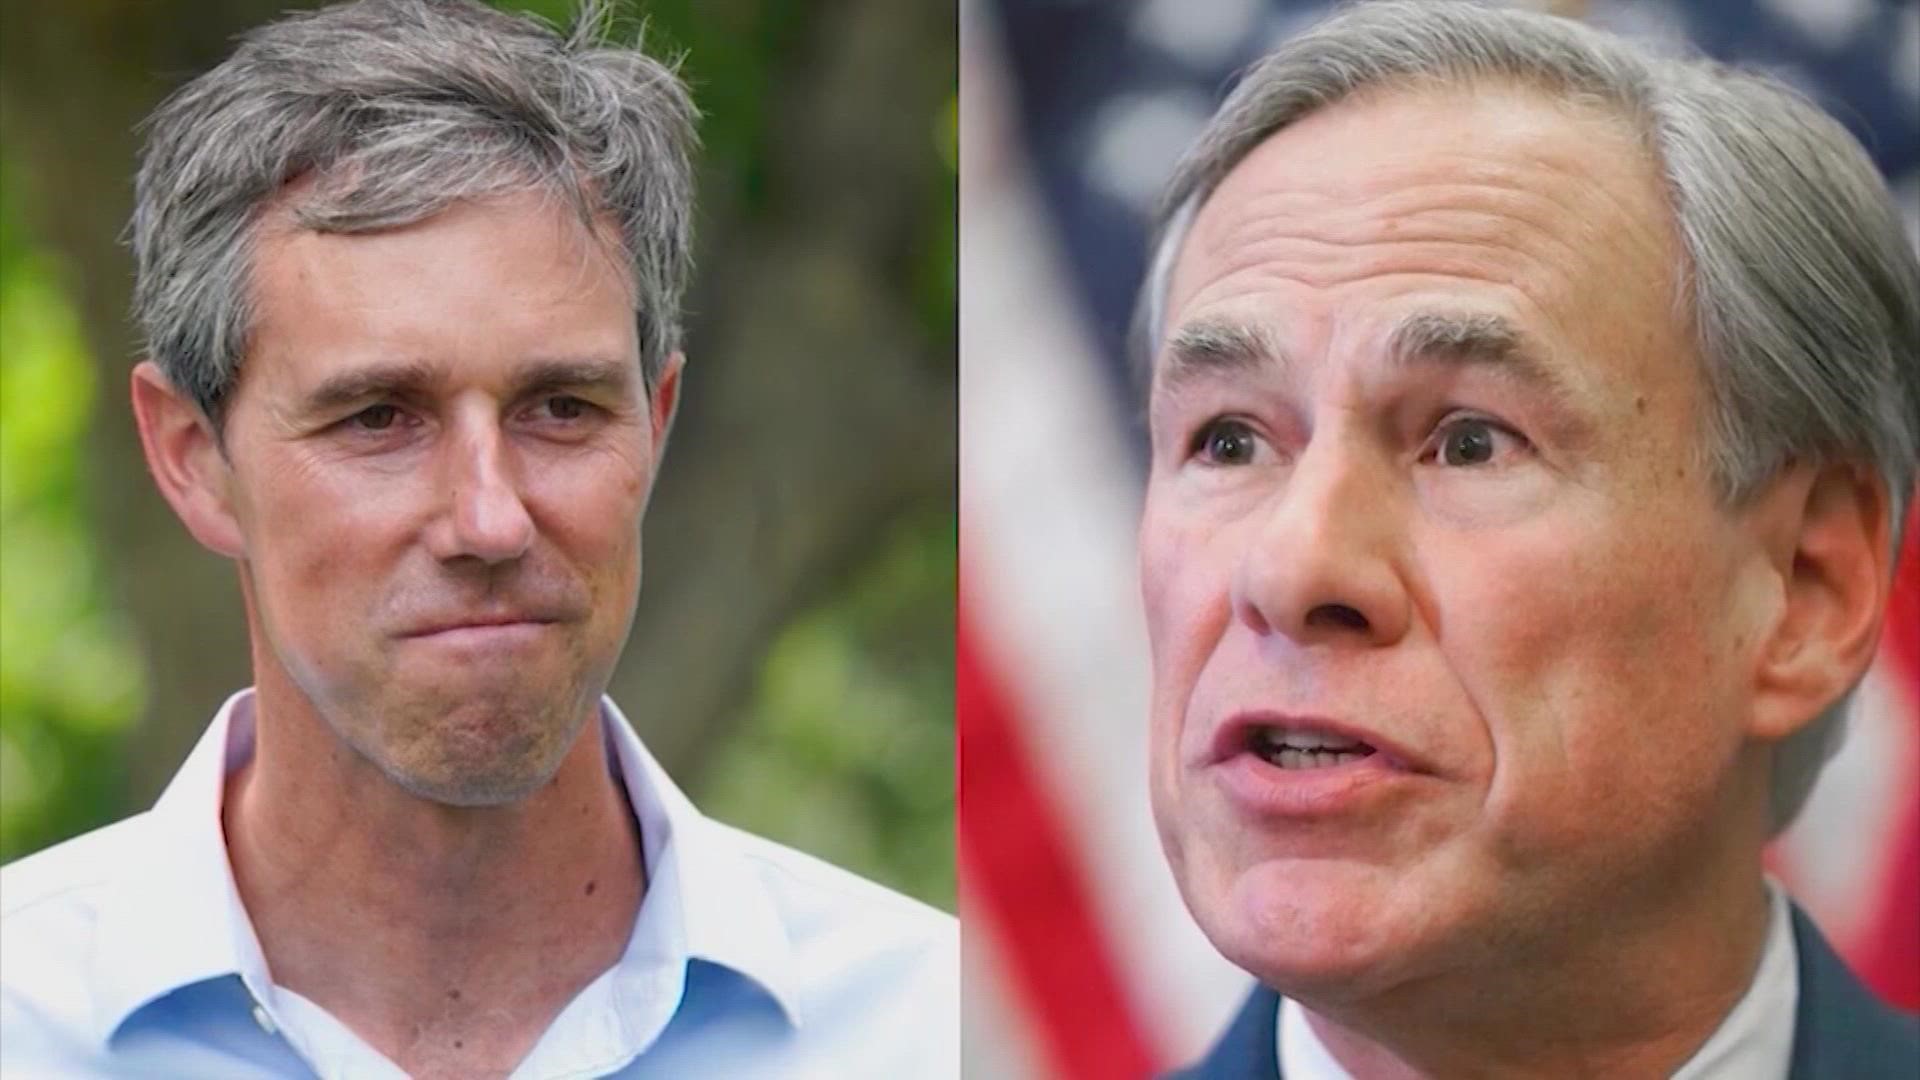 Abbott’s 11-point lead comes just days before early voting begins and it’s not the news the O’Rourke campaign anticipated this close to the election.